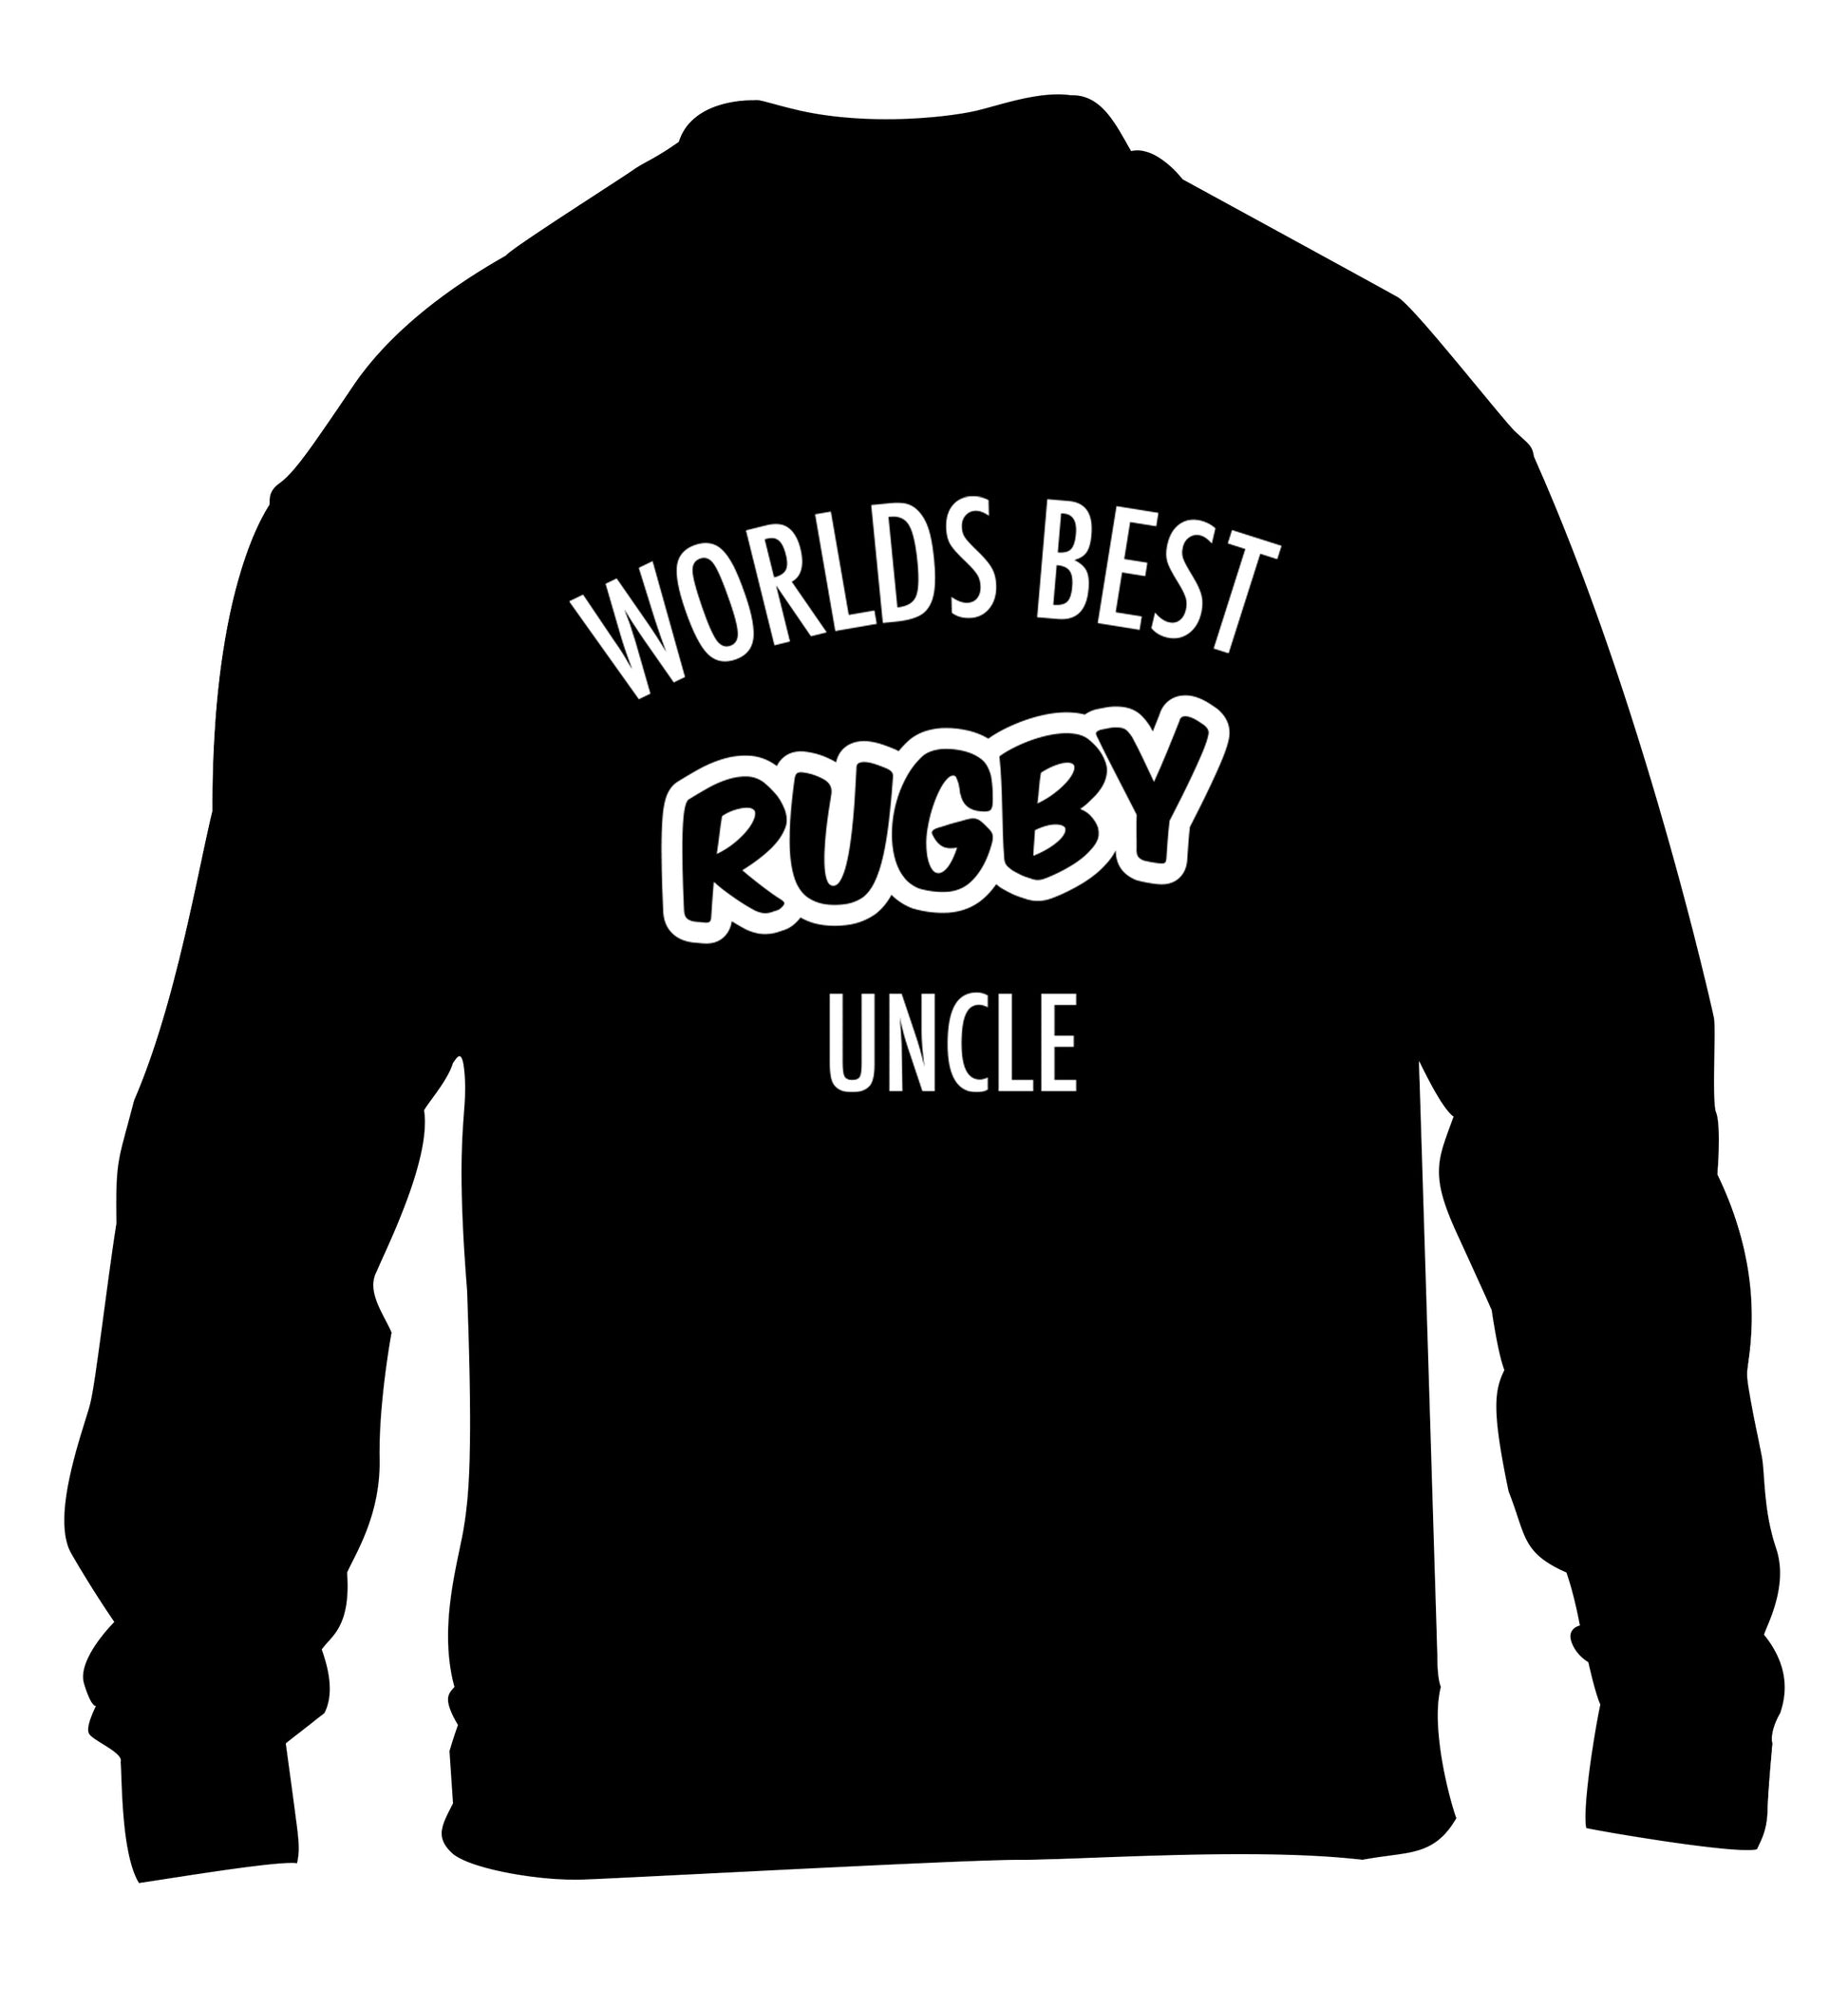 Worlds best rugby uncle children's black sweater 12-13 Years